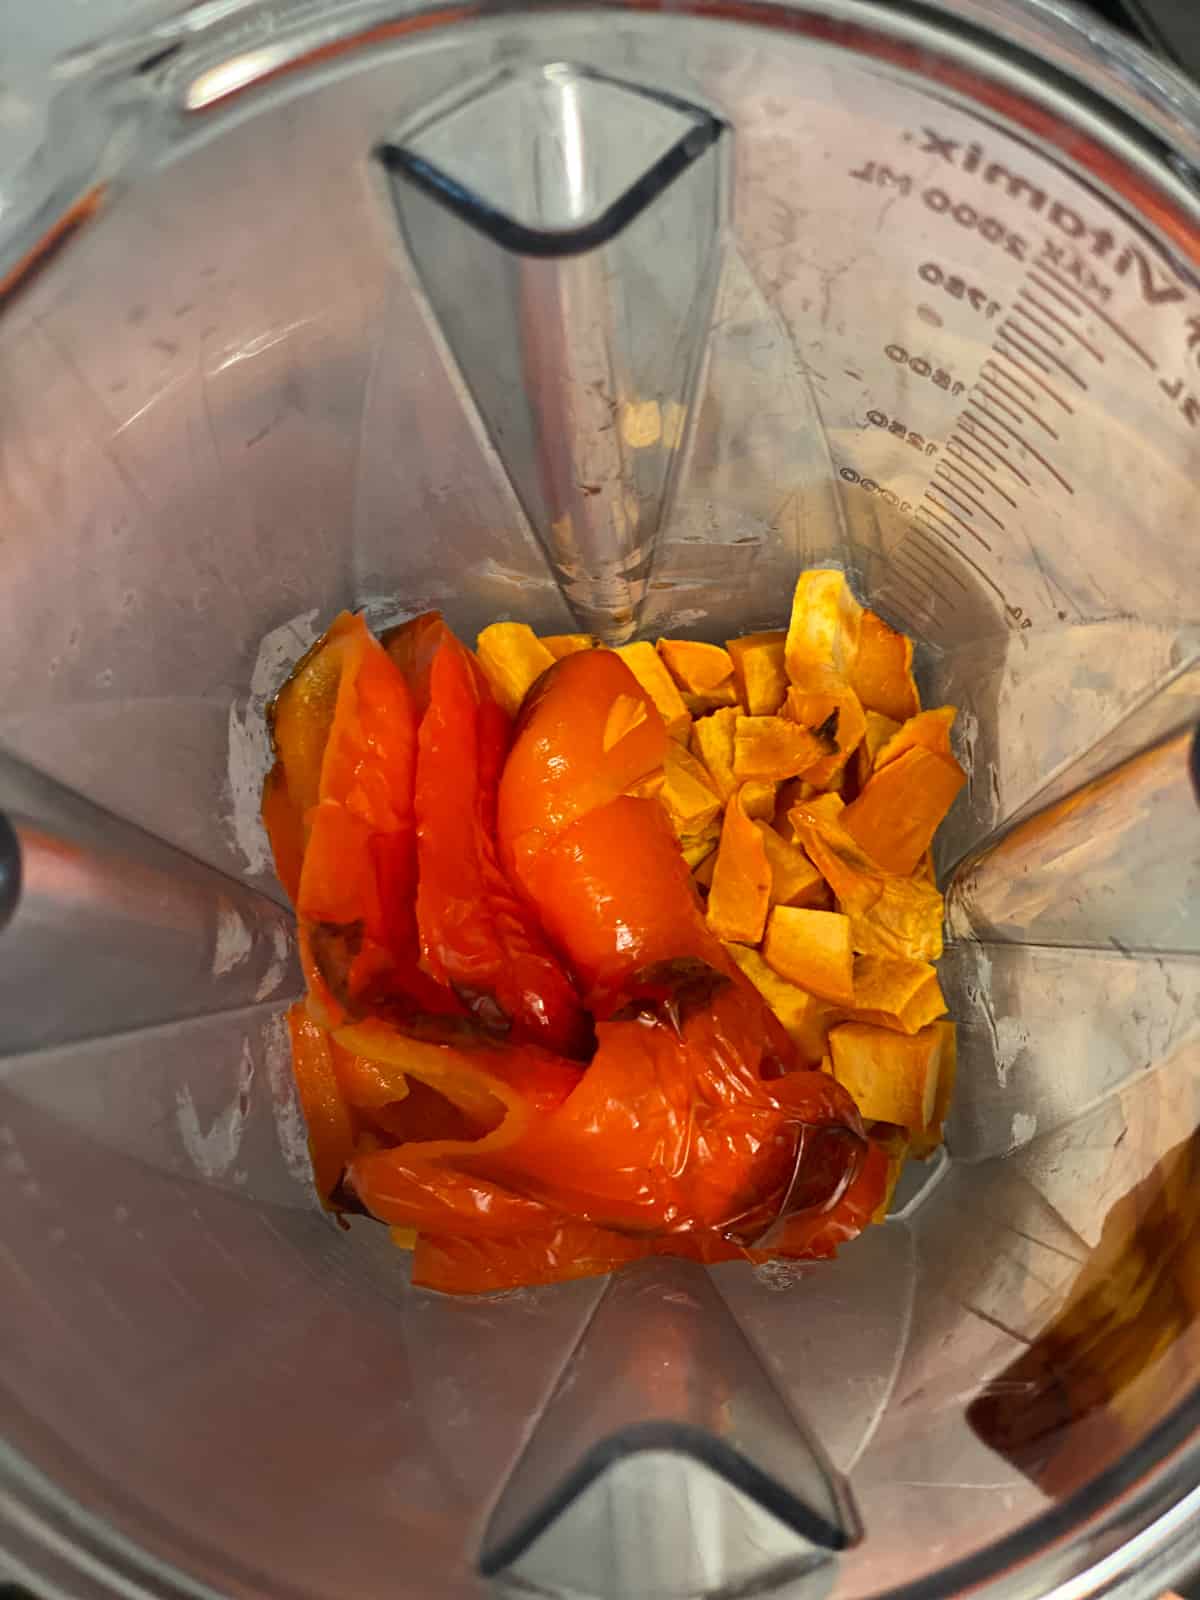 red pepper and sweet potato added to blender